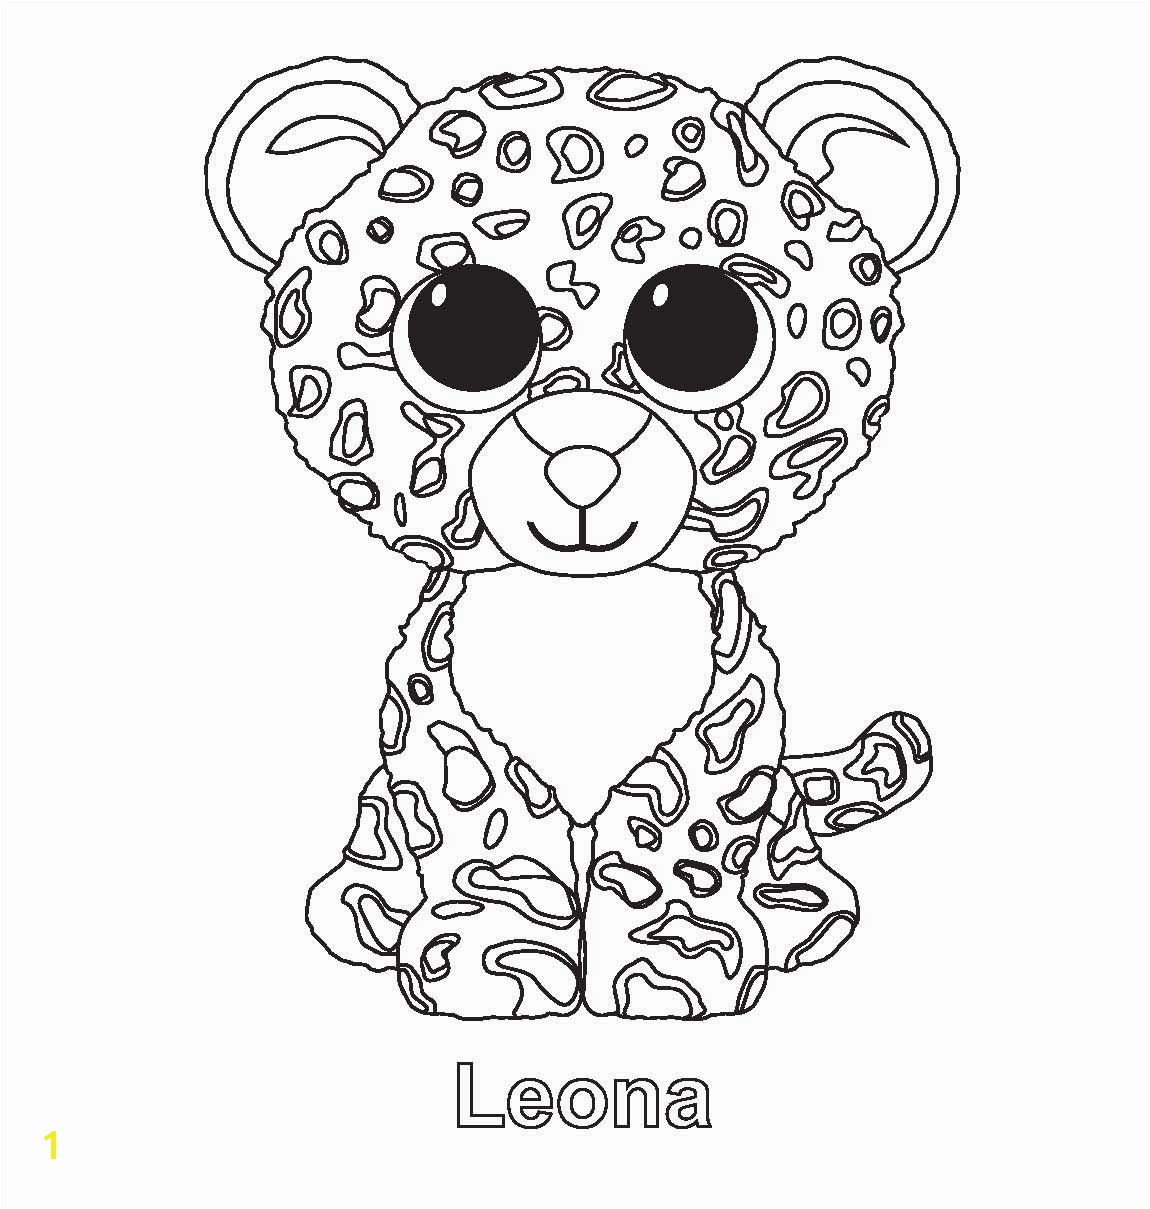 Ty Beanie Babies Coloring Pages Beanie Boo Coloring Pages Cool Coloring Pages